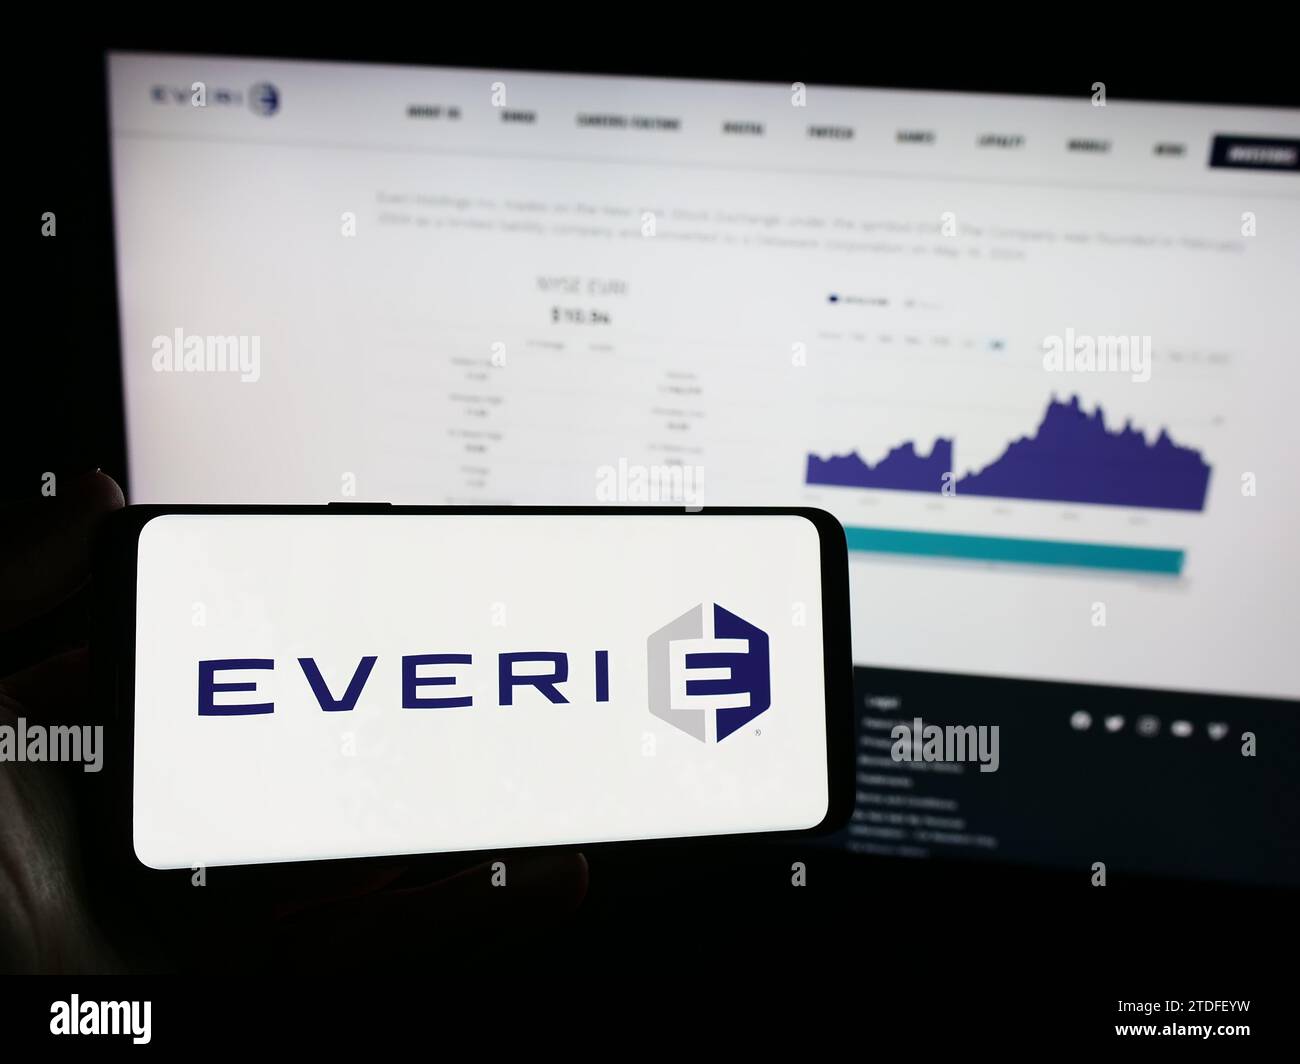 Person holding mobile phone with logo of American slot machine company Everi Holdings Inc. in front of business web page. Focus on phone display. Stock Photo